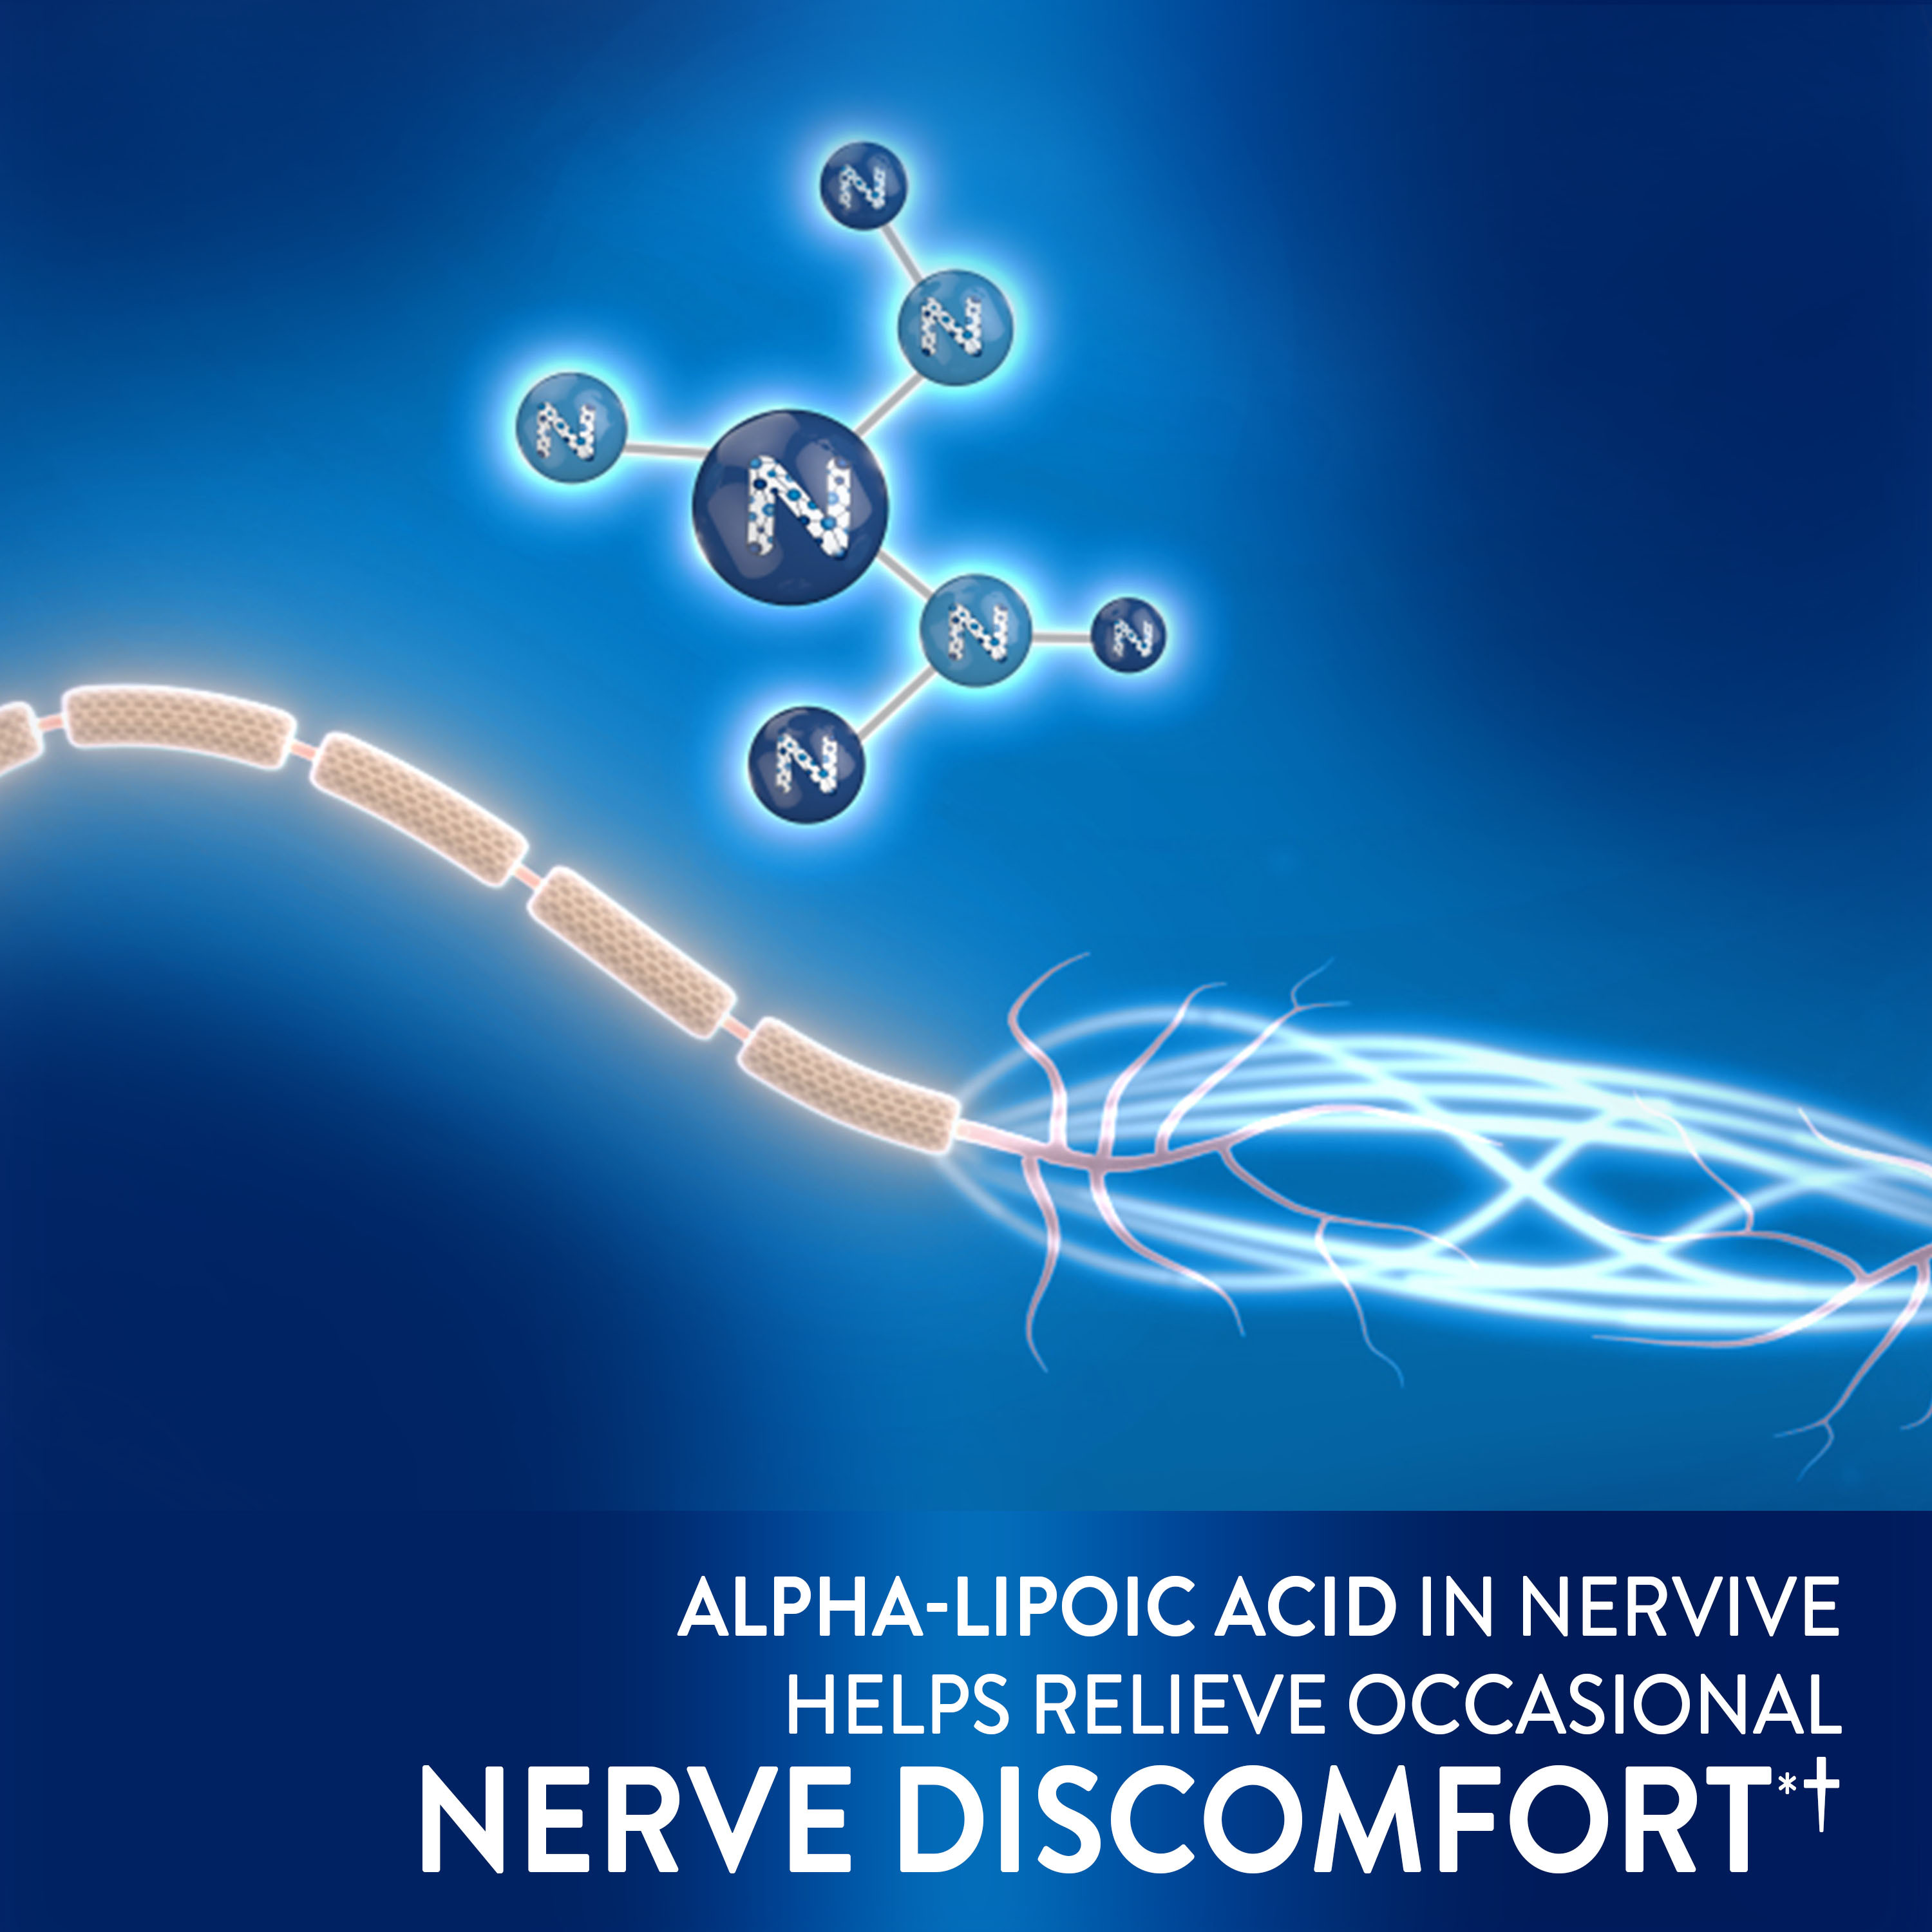 Nervive Advanced Nerve Pain + Mobility, Aches and Pains, Weakness ...